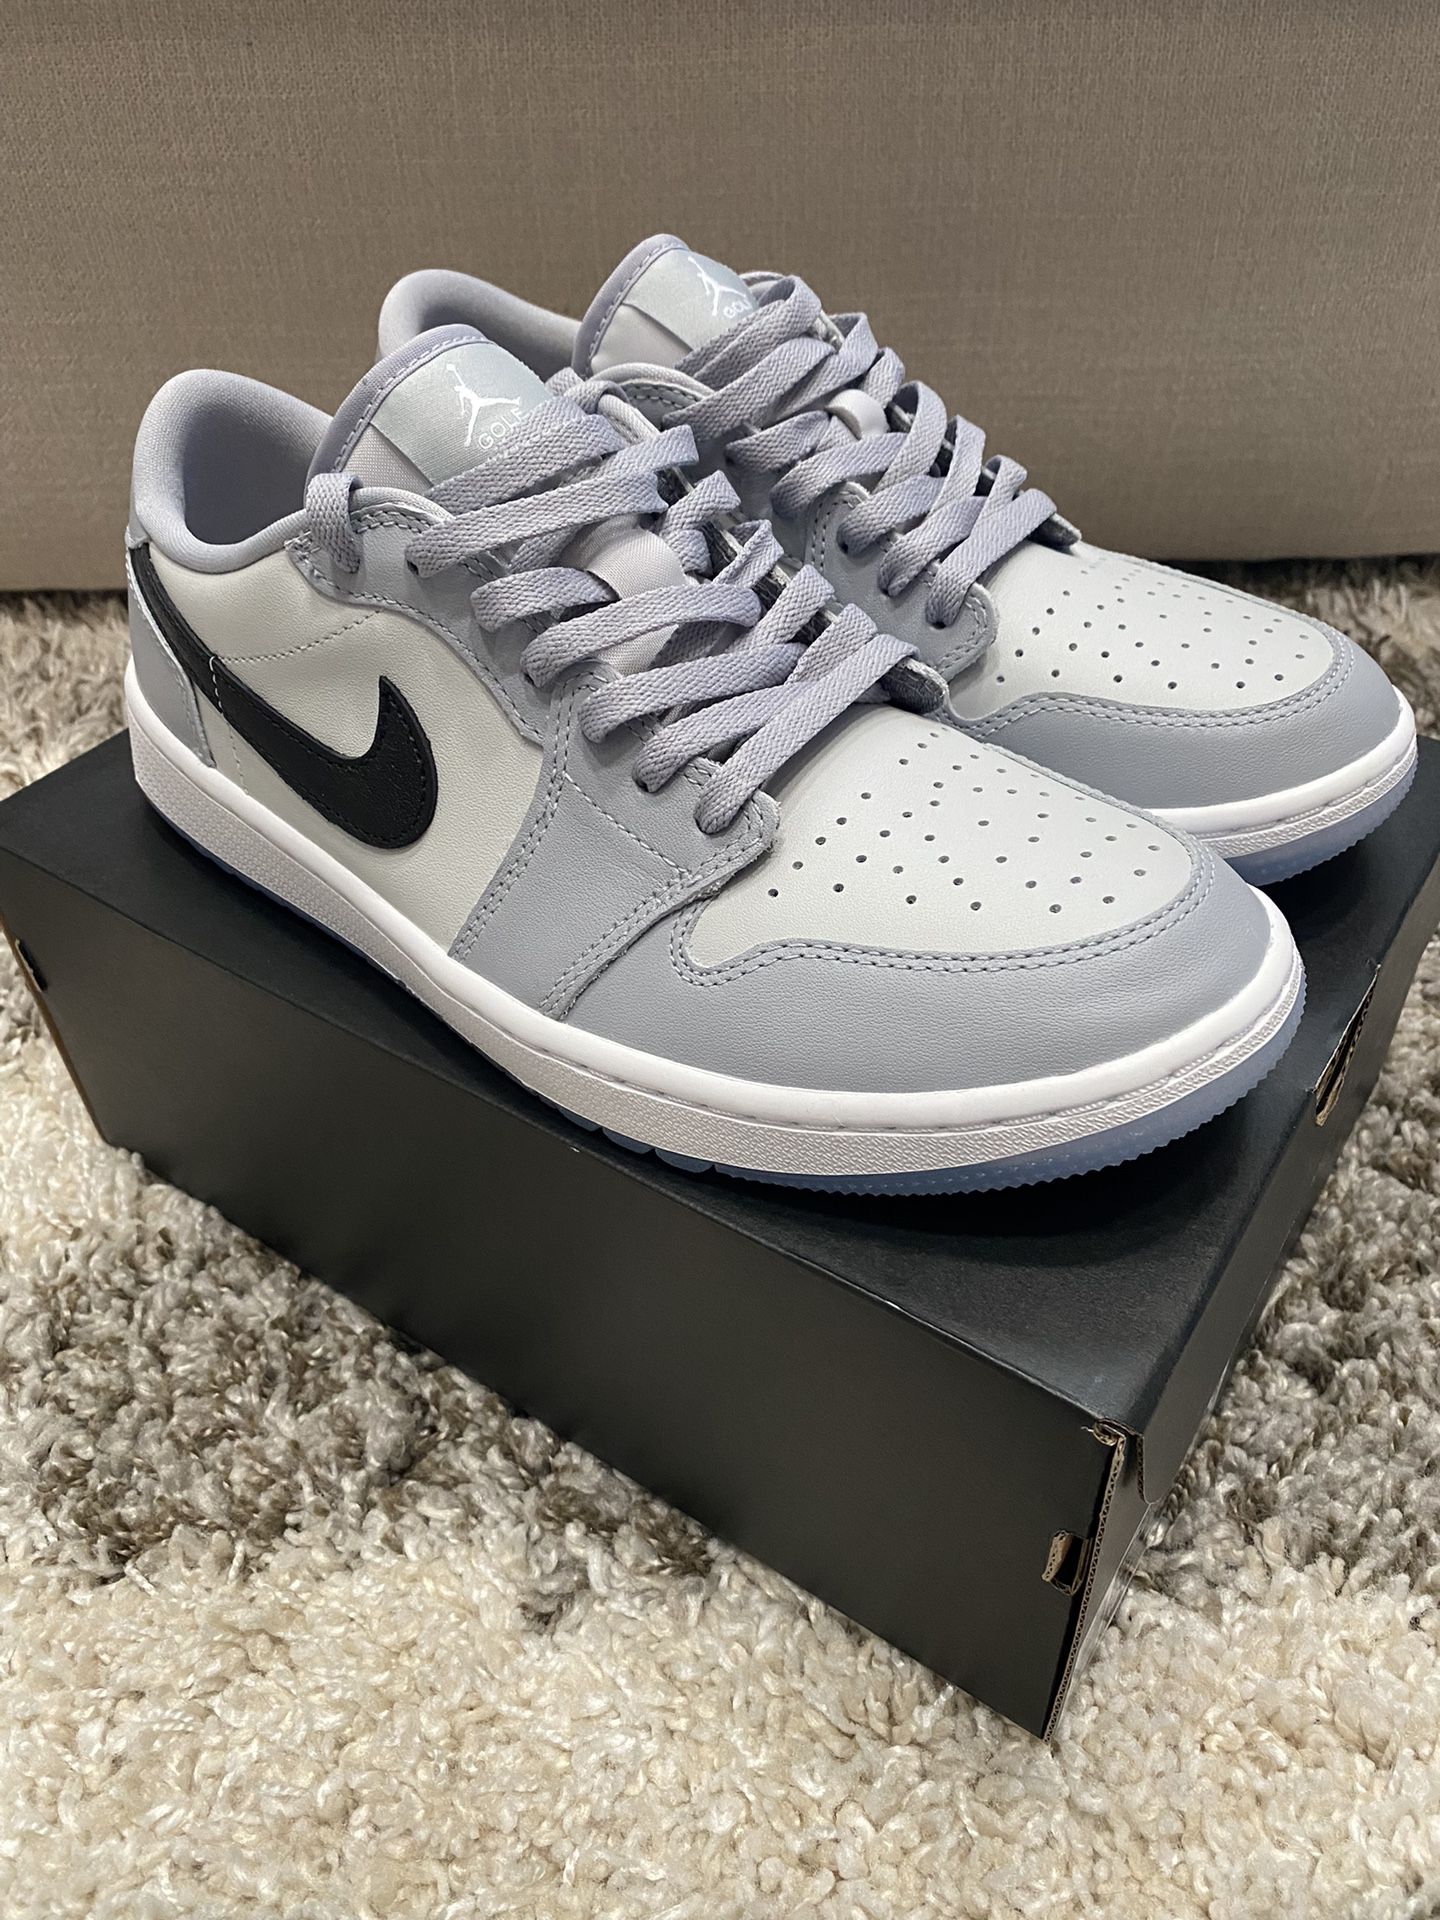 Air Jordan 1 Low Golf Wolf Grey size 9 for Sale in San Francisco, CA -  OfferUp